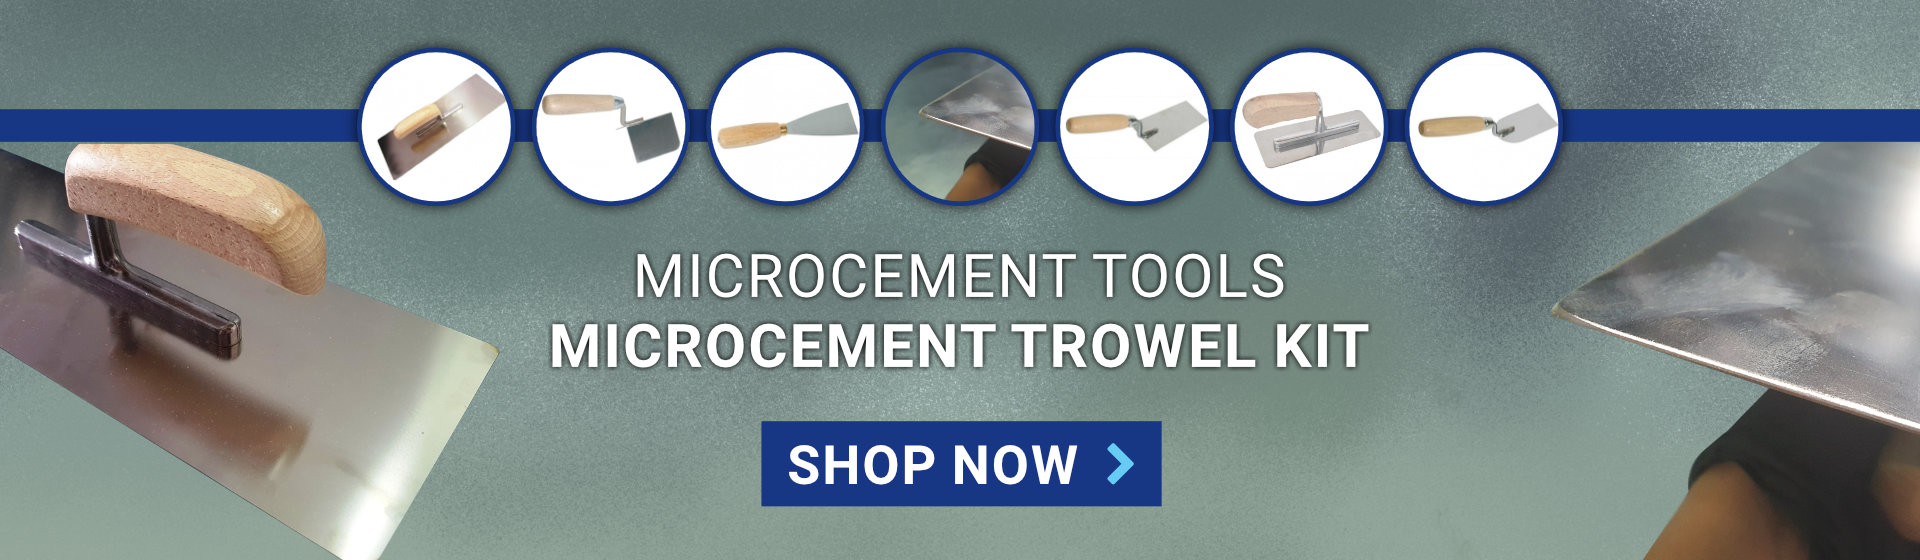 microcement tools